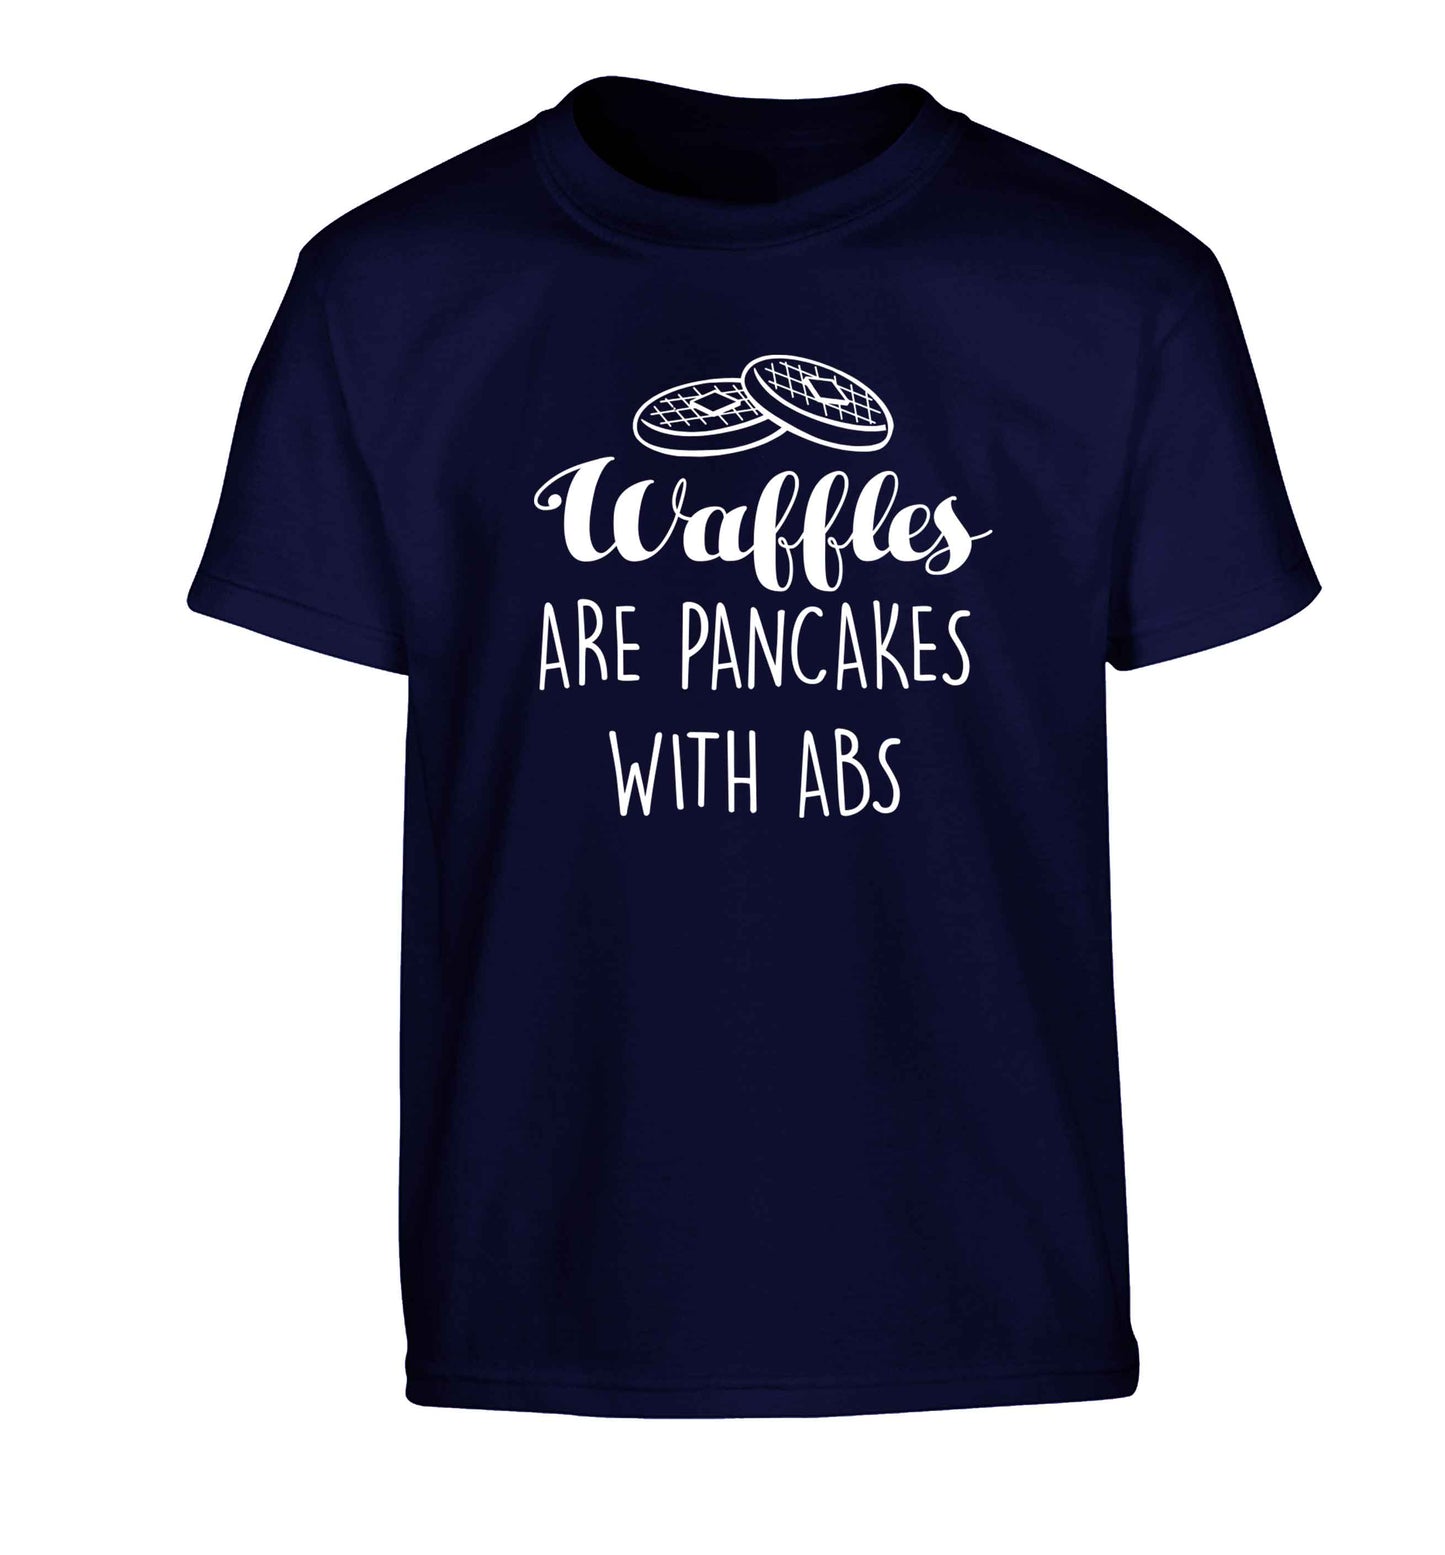 Waffles are just pancakes with abs Children's navy Tshirt 12-13 Years